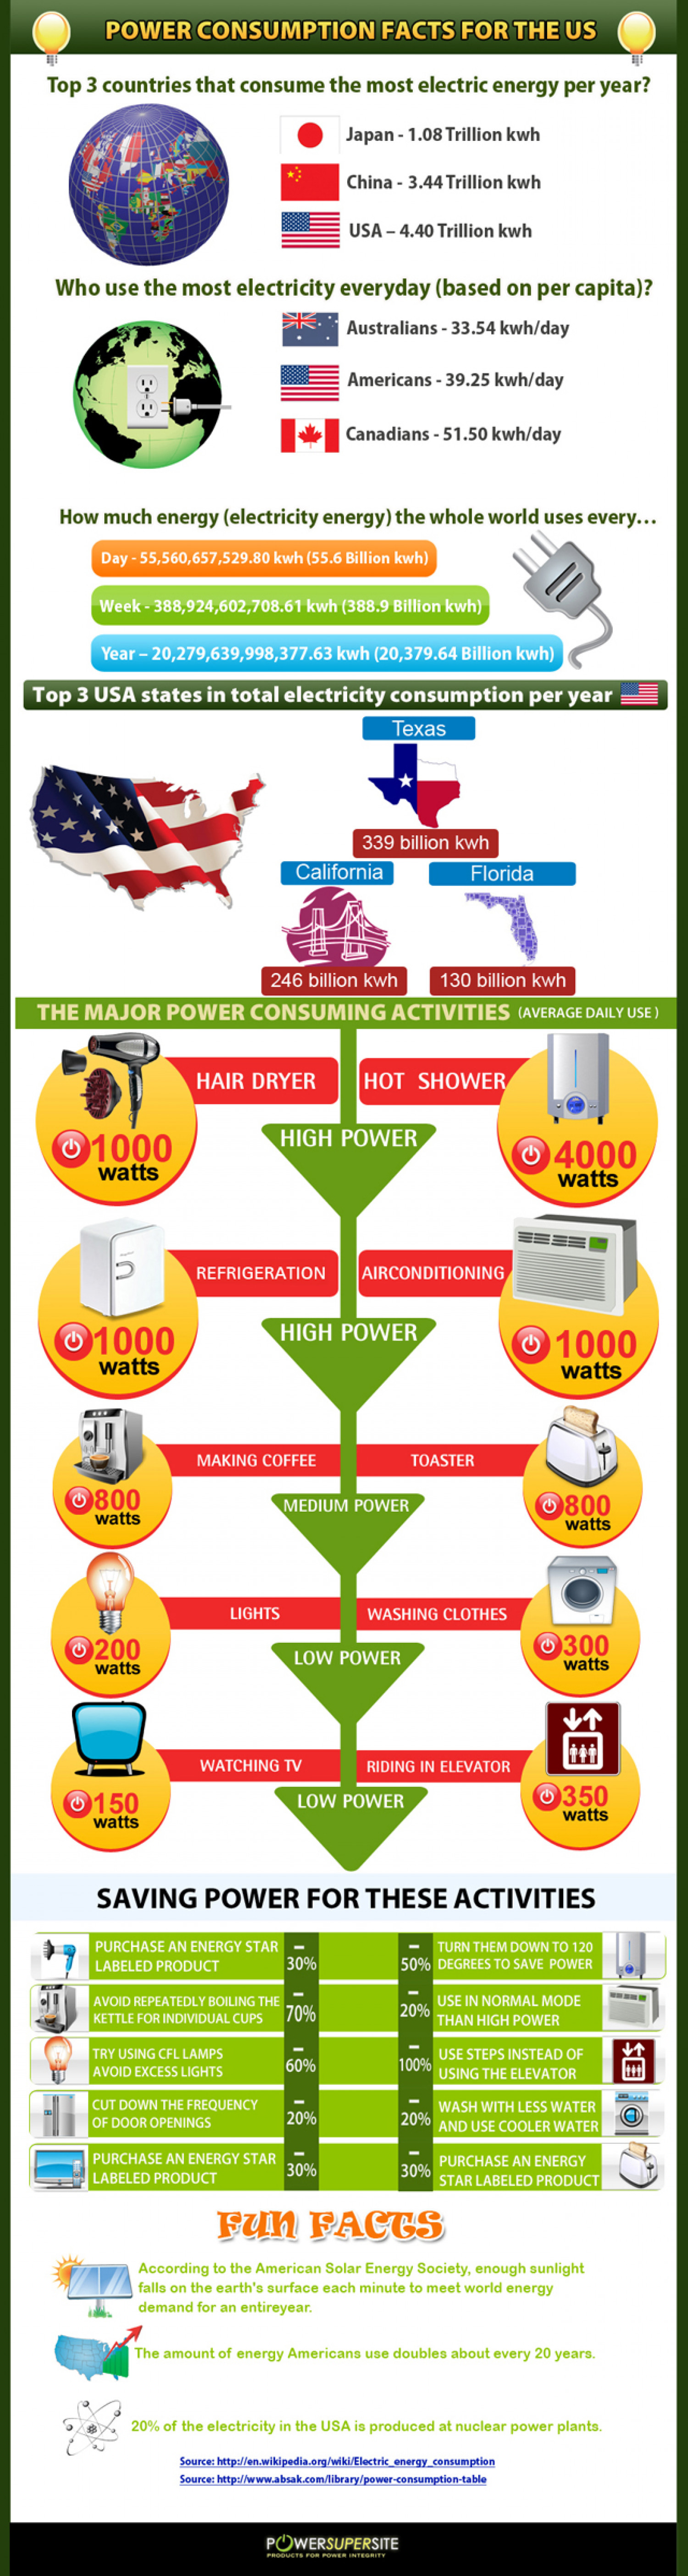 Power Consumption Facts For The US Infographic